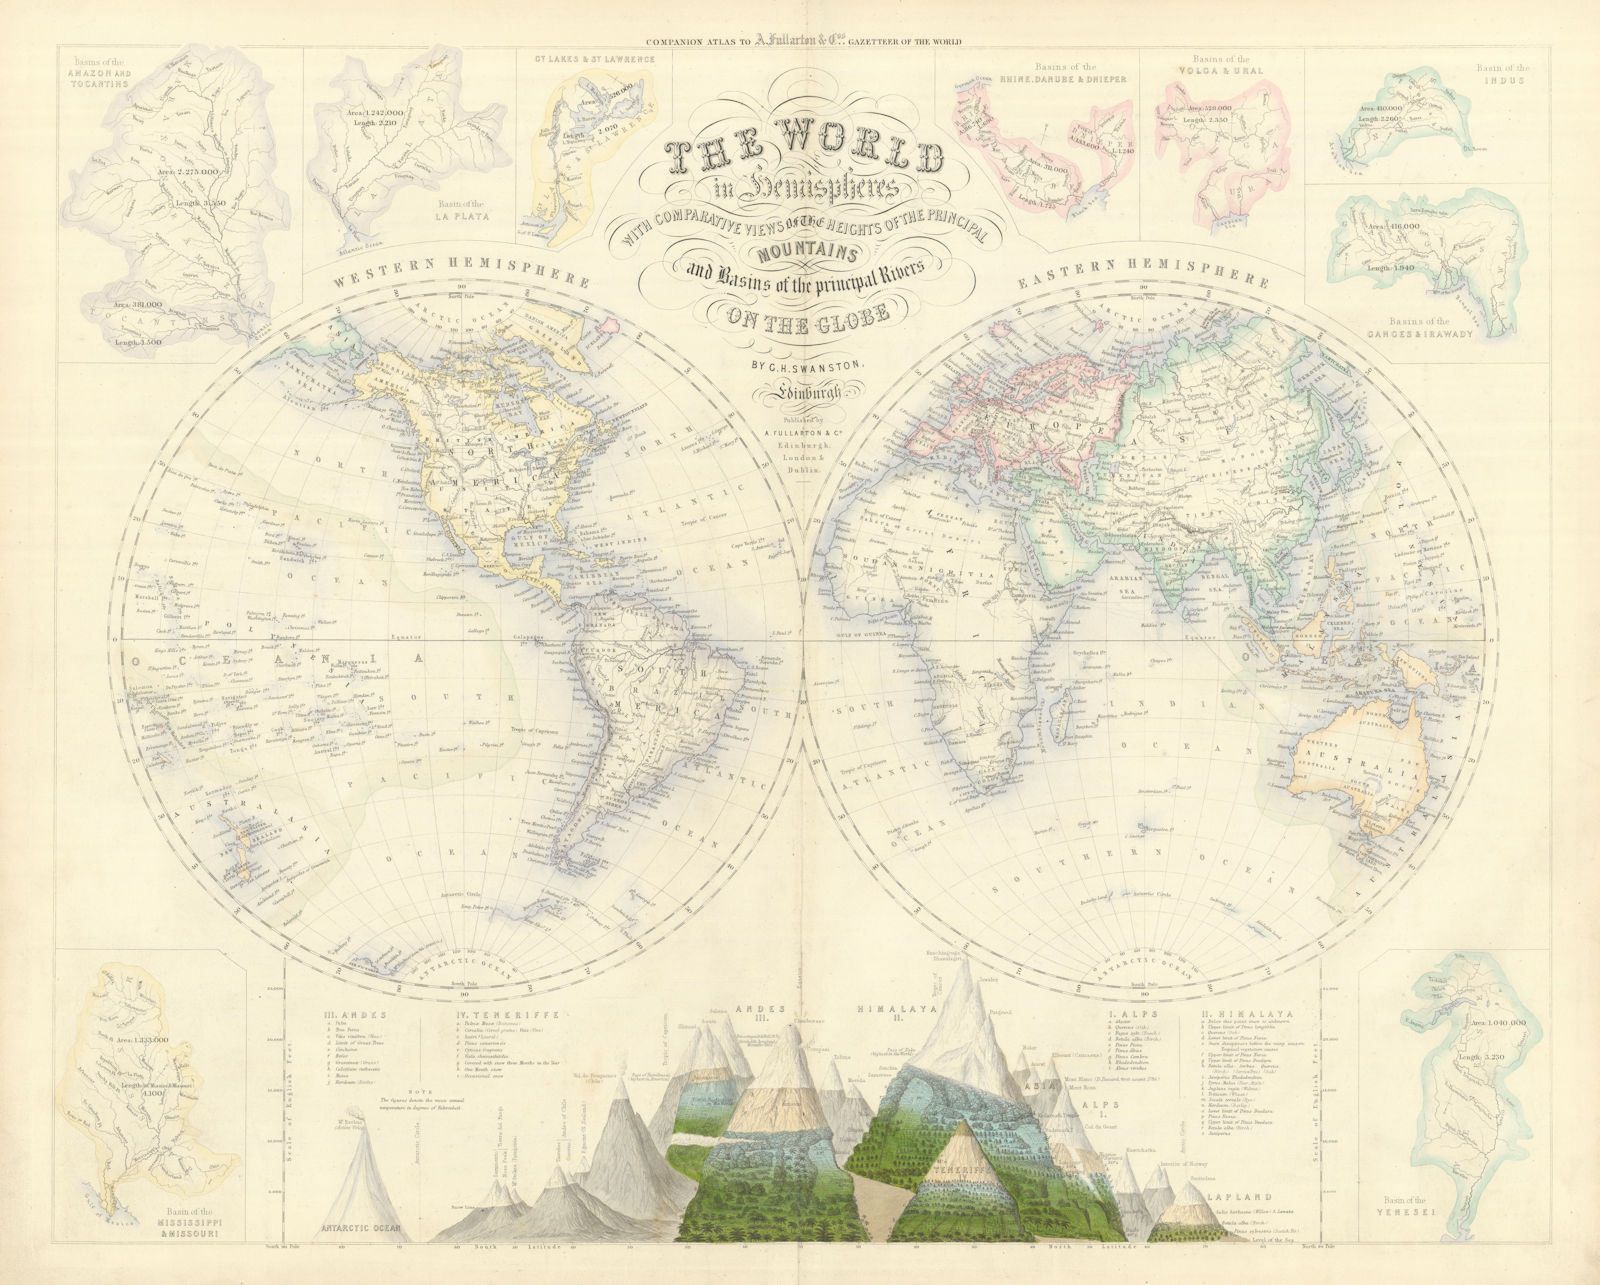 Associate Product World in hemispheres. Mountains & rivers. SWANSTON 1860 old antique map chart